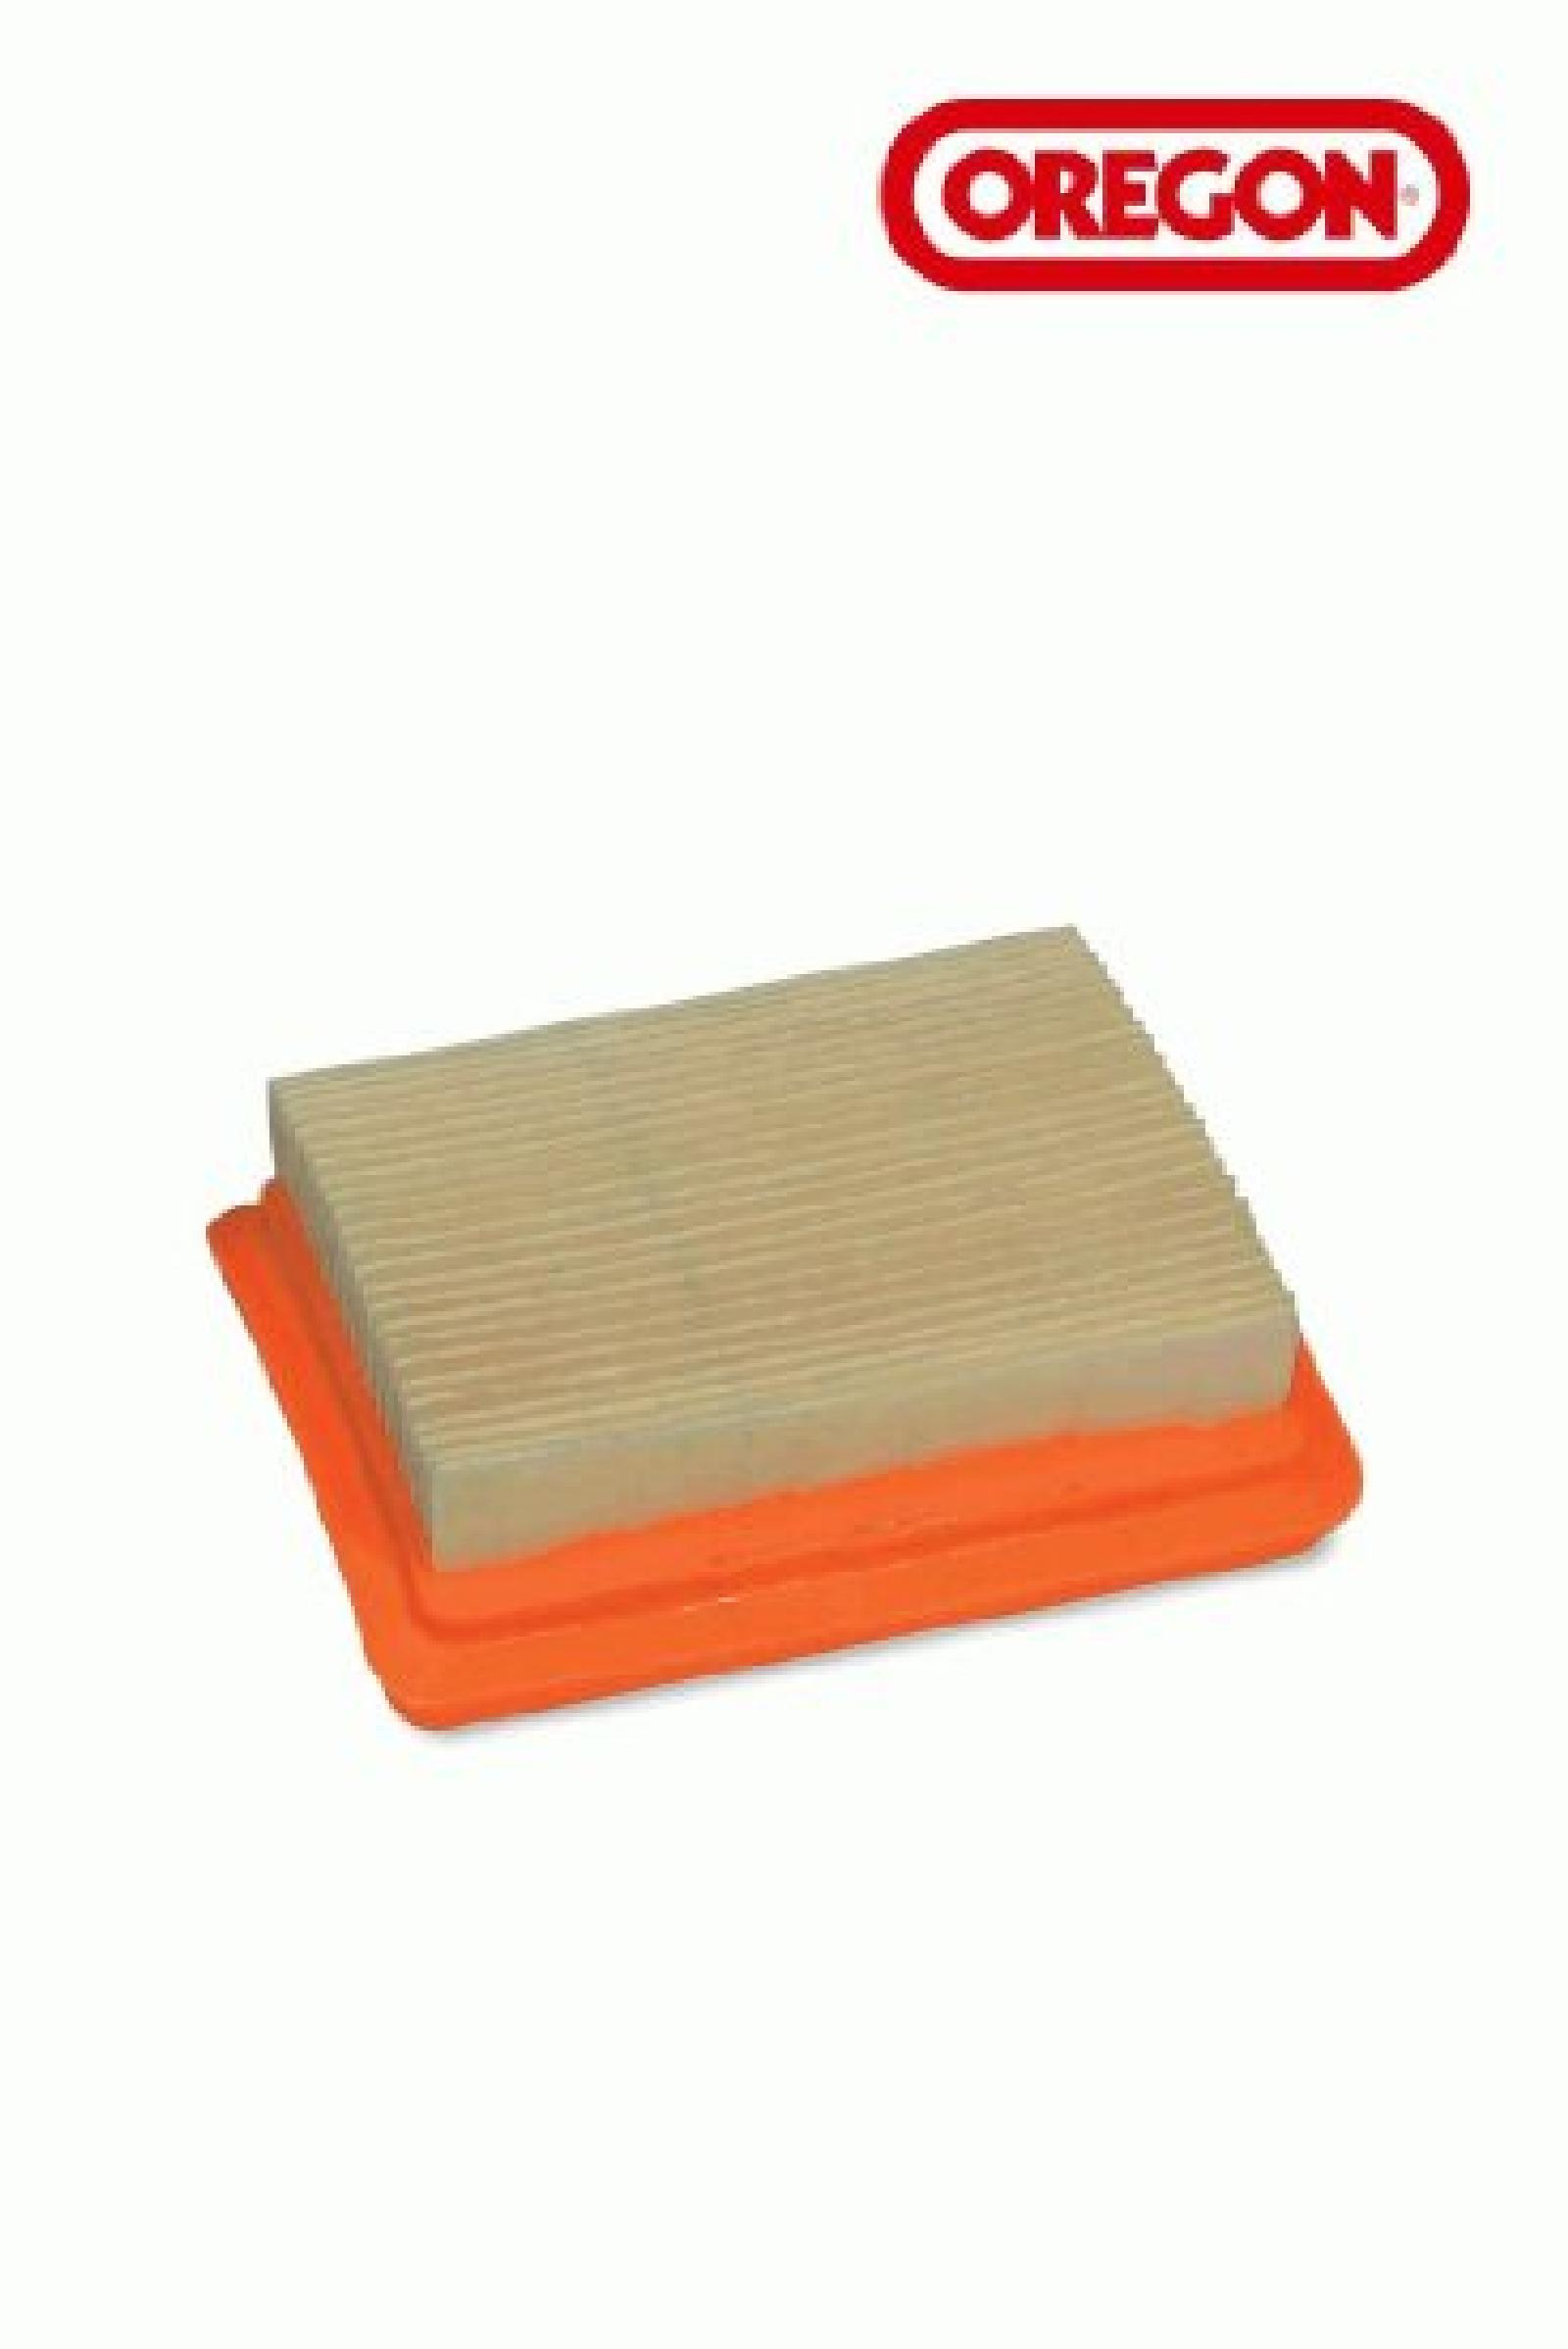 AIR FILTER STIHL part# 55-079 by Oregon